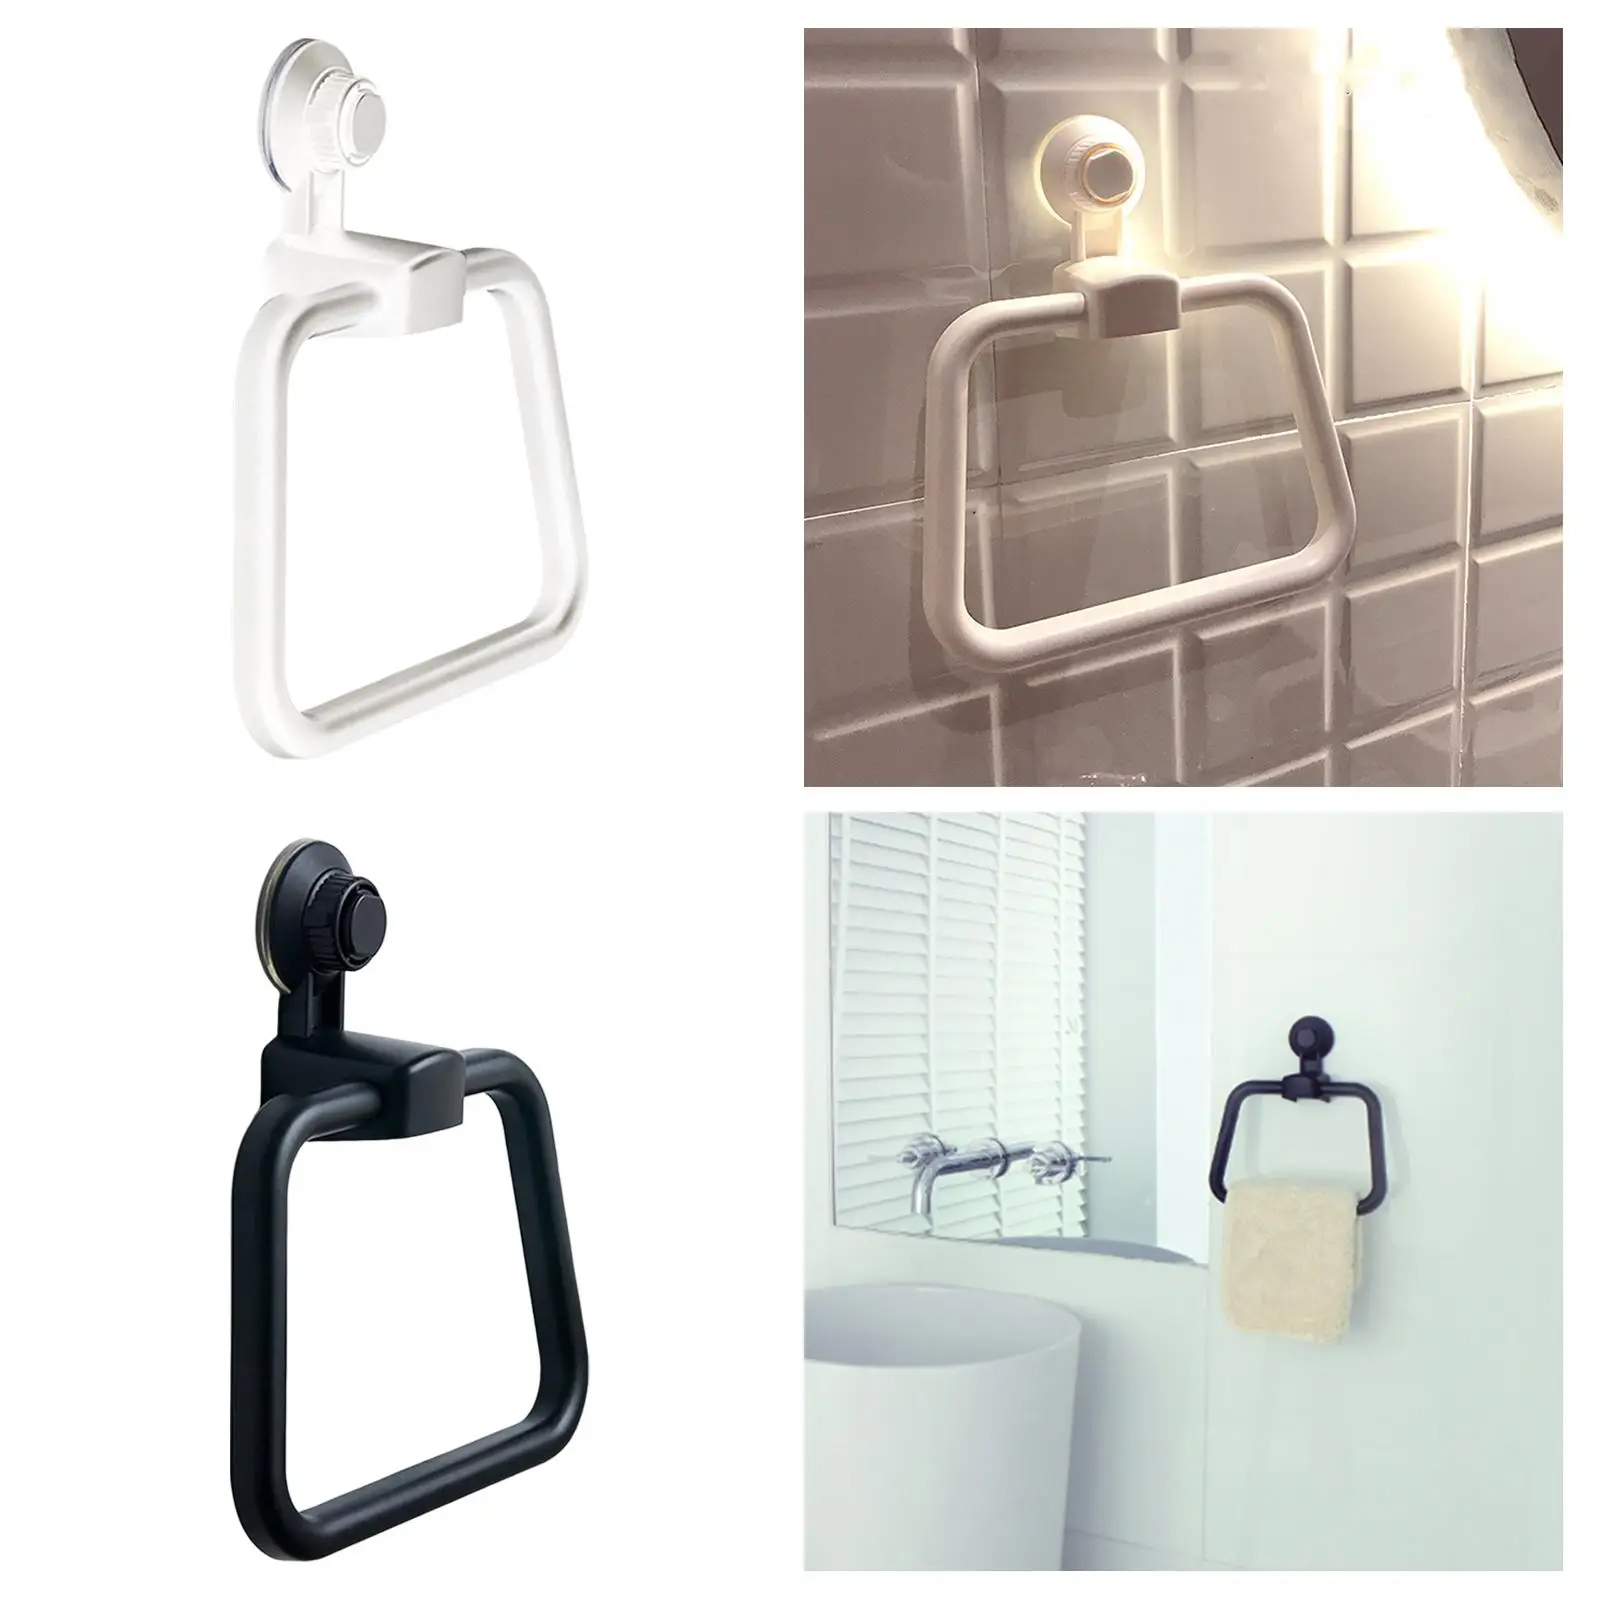 Vacuum Suction Towel Holder Suction Towel Rings for Bathroom Laundry Room